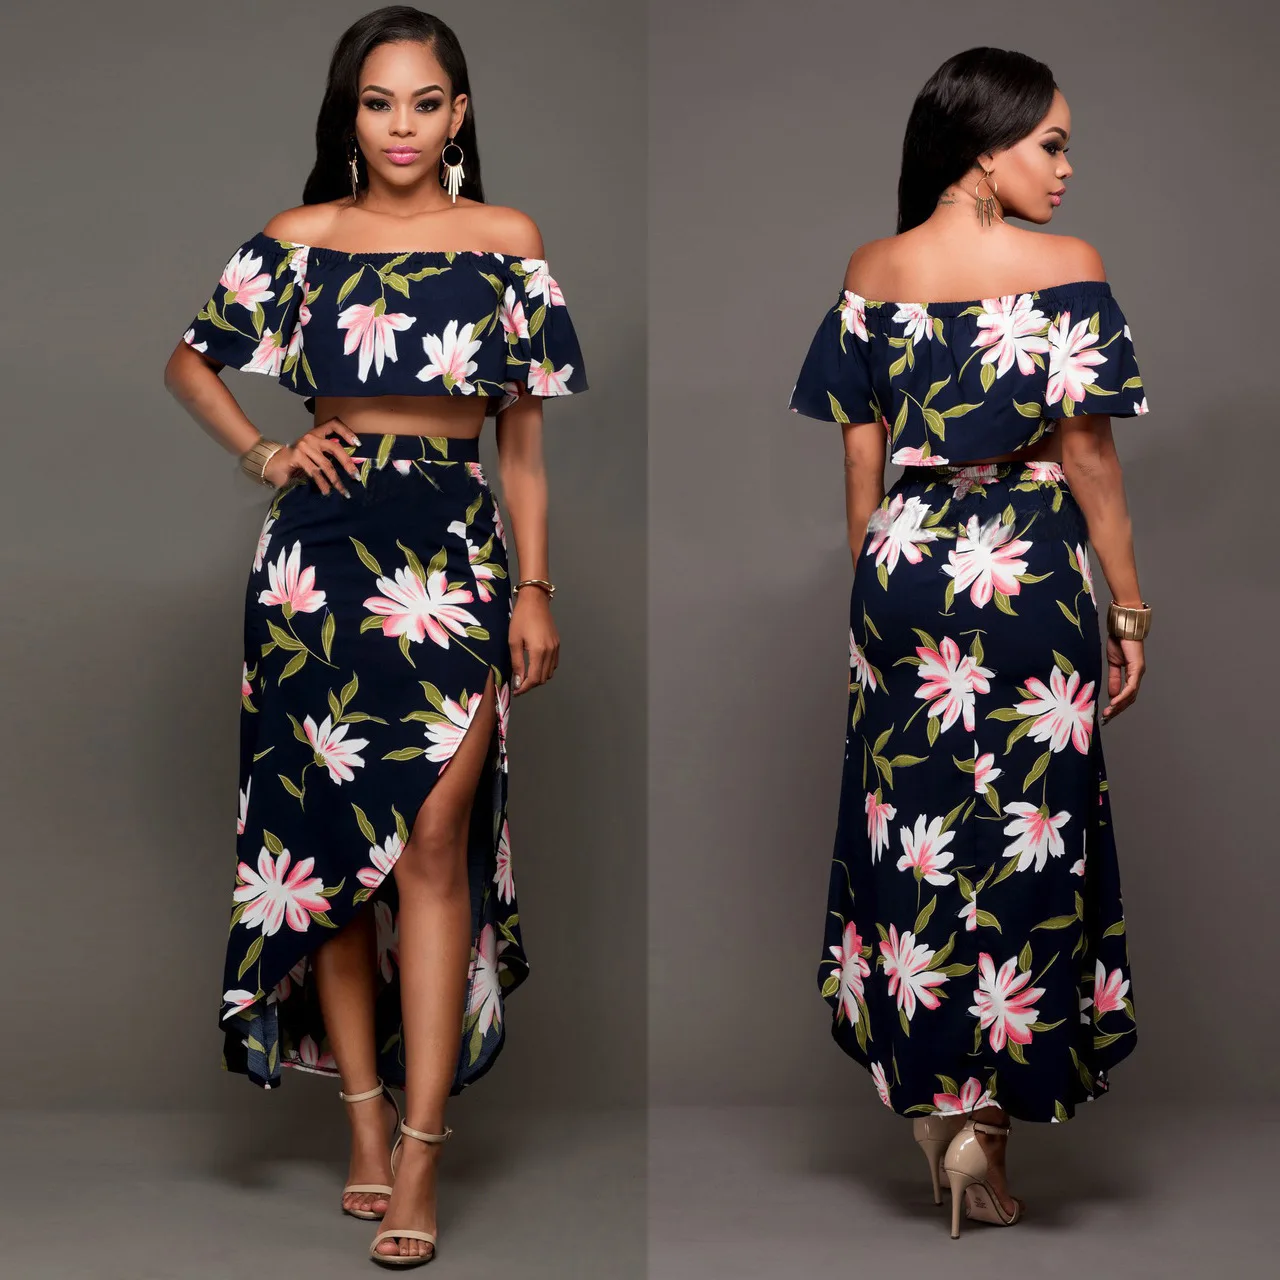 Clarisse 3556 Off Shoulder Floral Two Piece Dress in Black Womens Clothing Dresses Casual and summer maxi dresses 